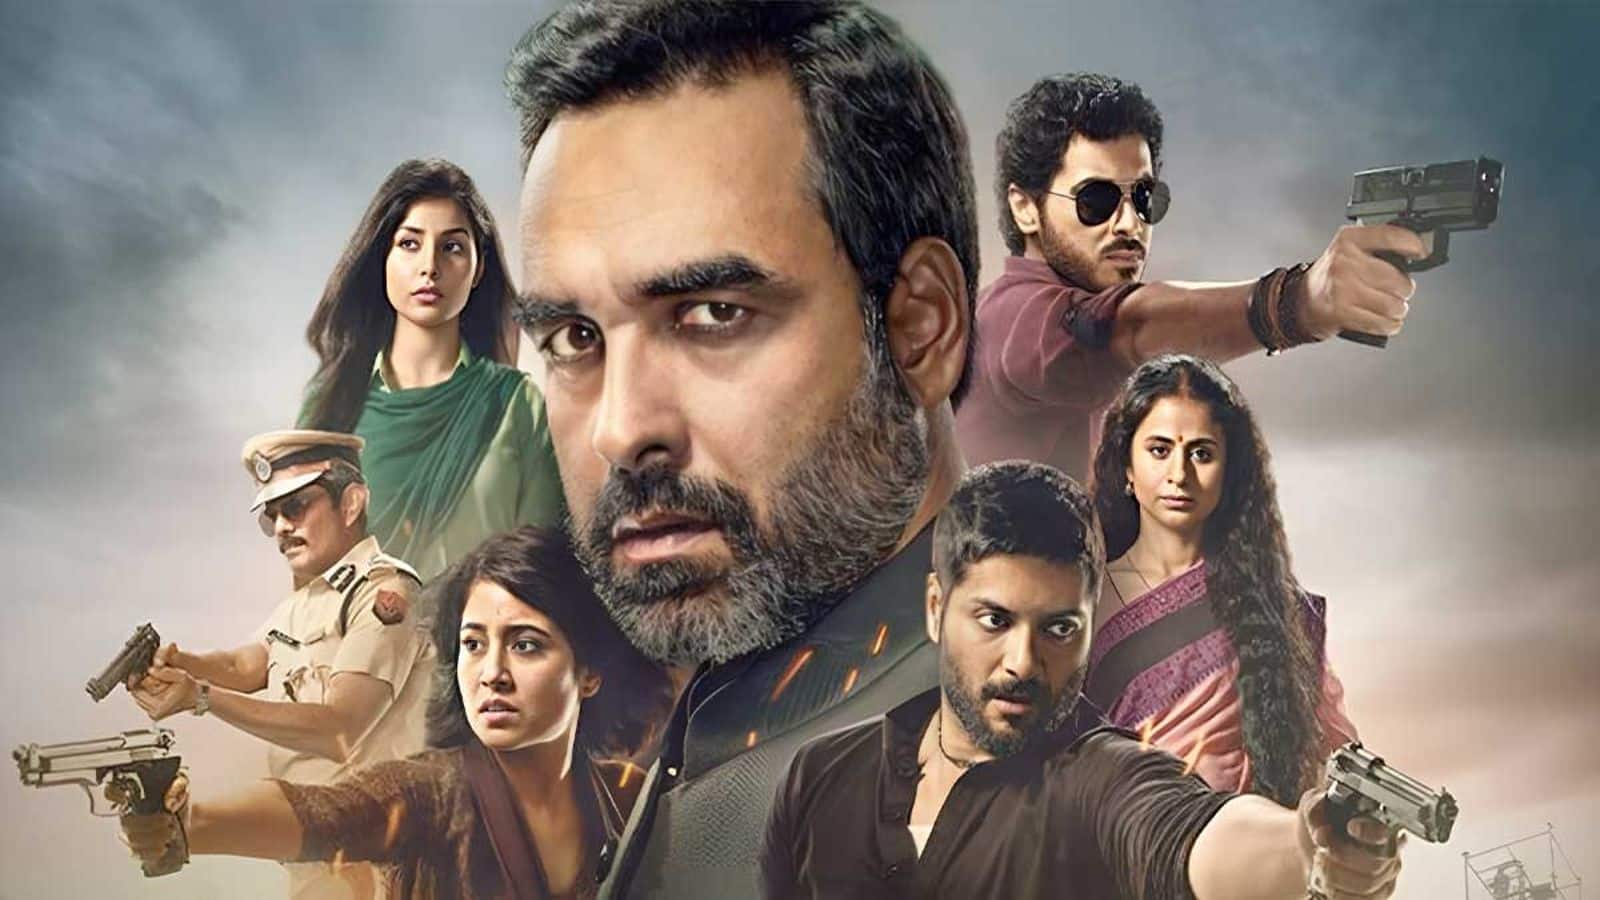 'Mirzapur' Season 3 poster is out!